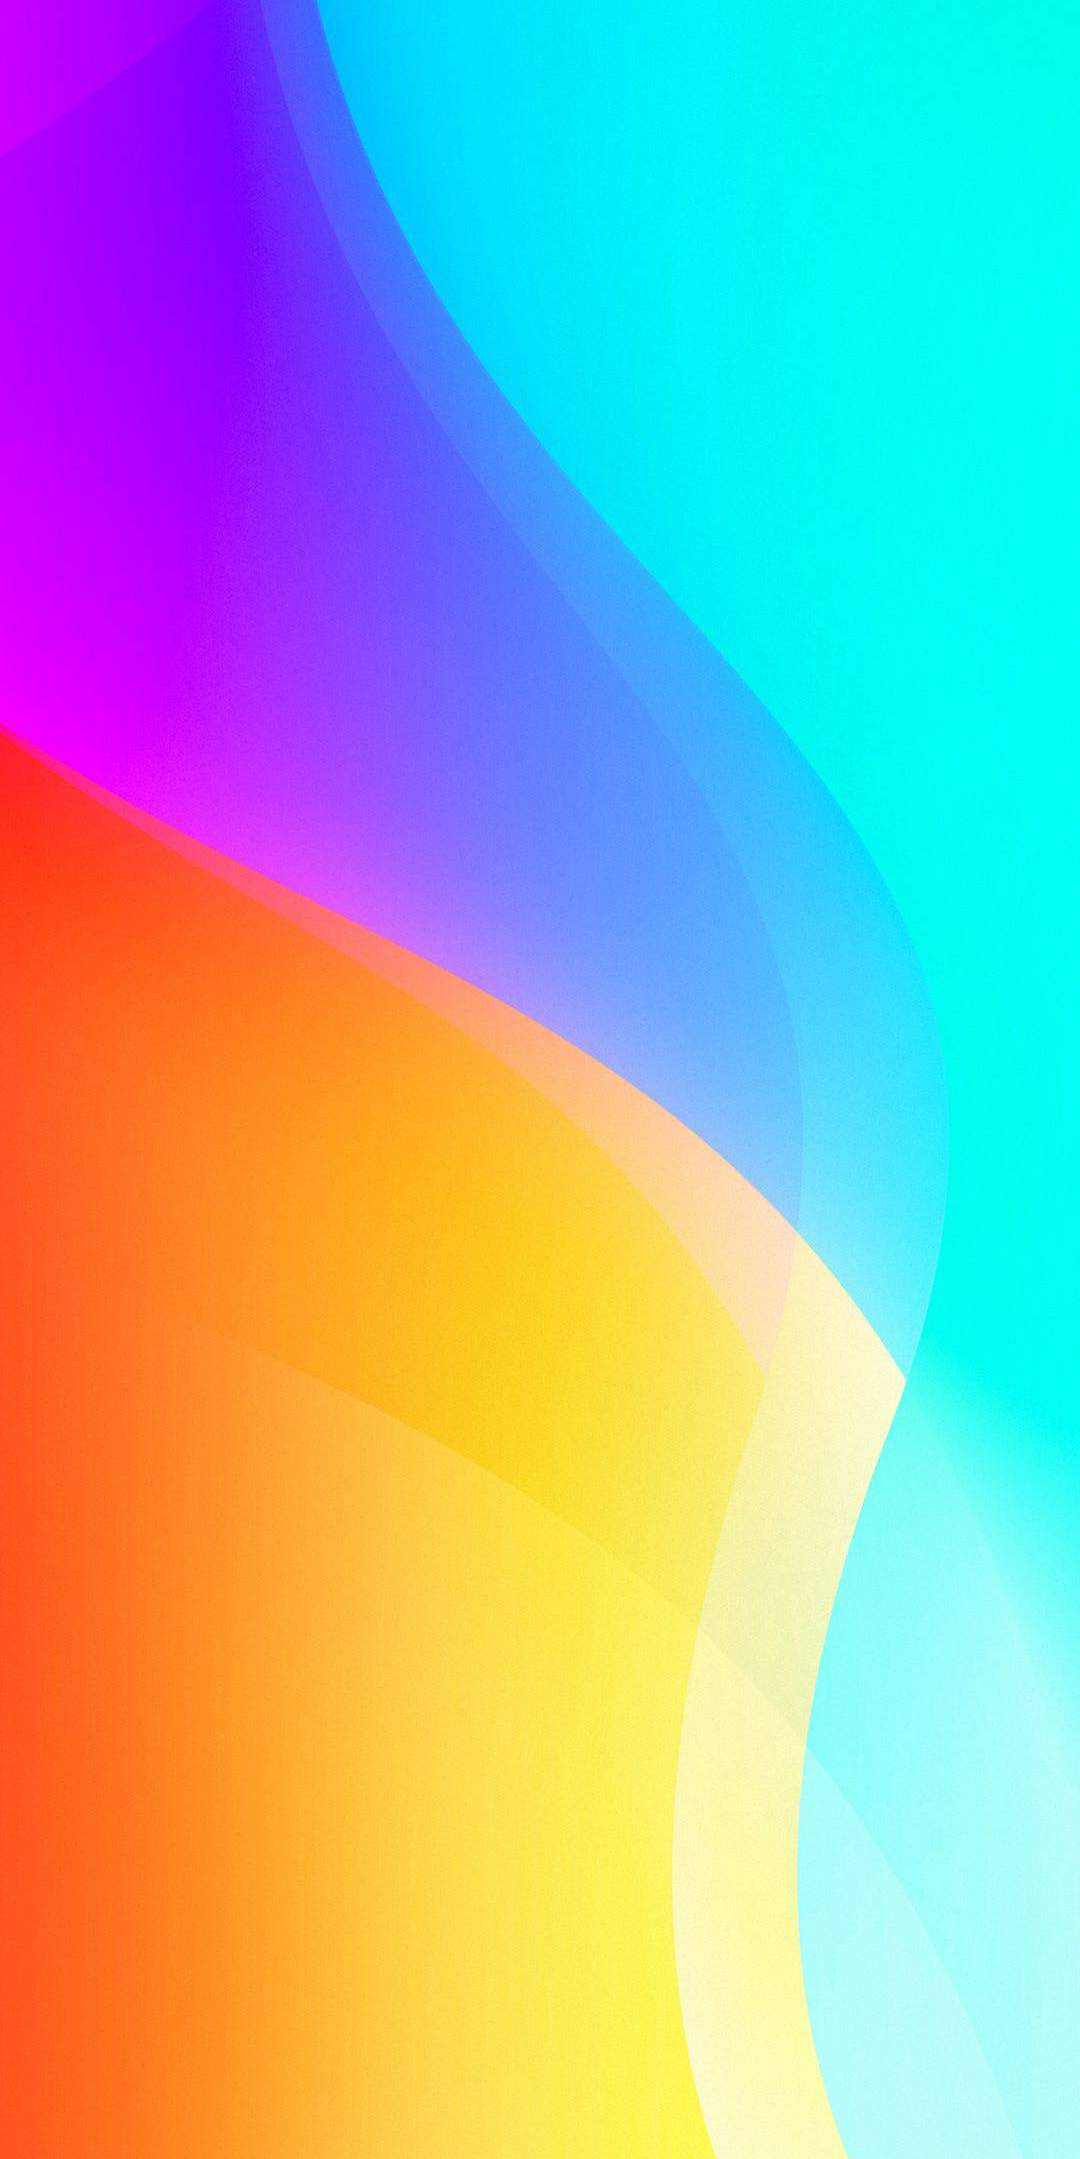 Vivo V11 IPhone Wallpaper - IPhone Wallpapers : iPhone Wallpapers